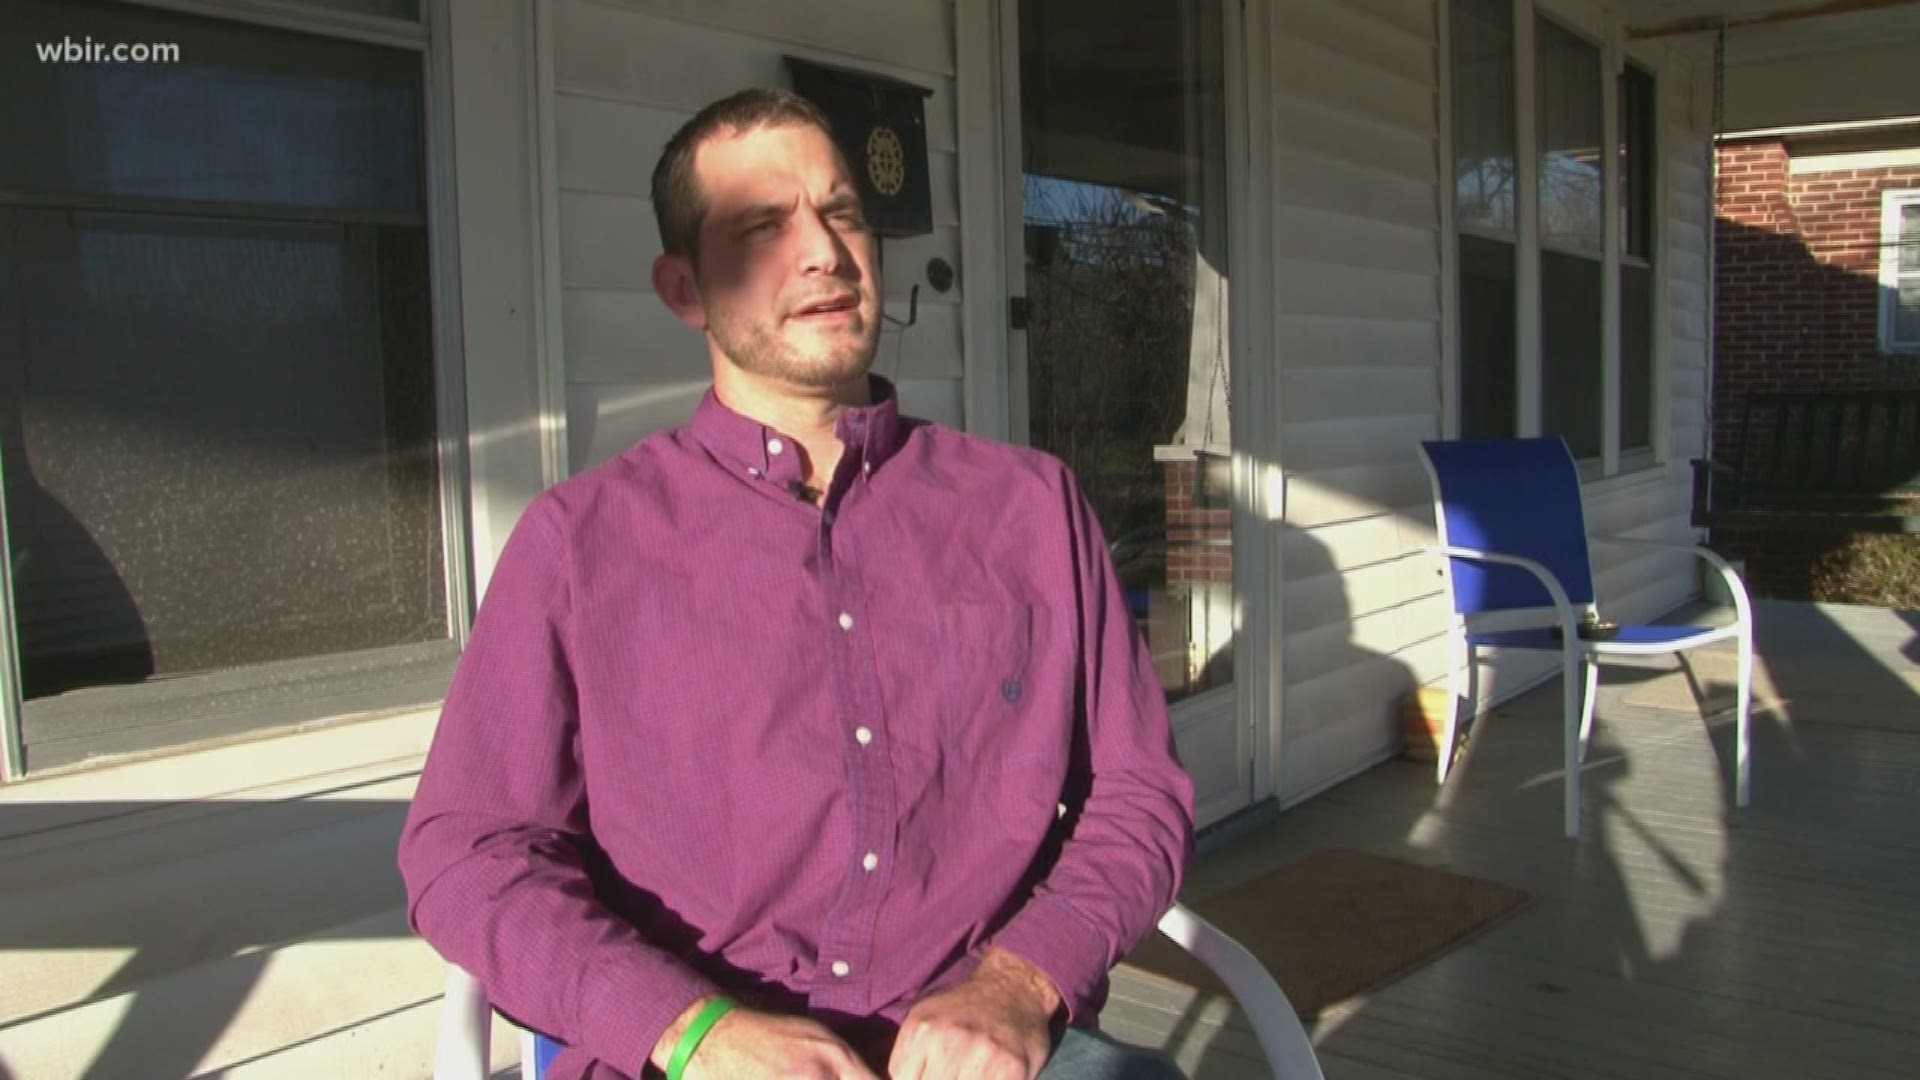 'I'm pretty sure I died': Knoxville man's life saved by Naloxone | wbir.com